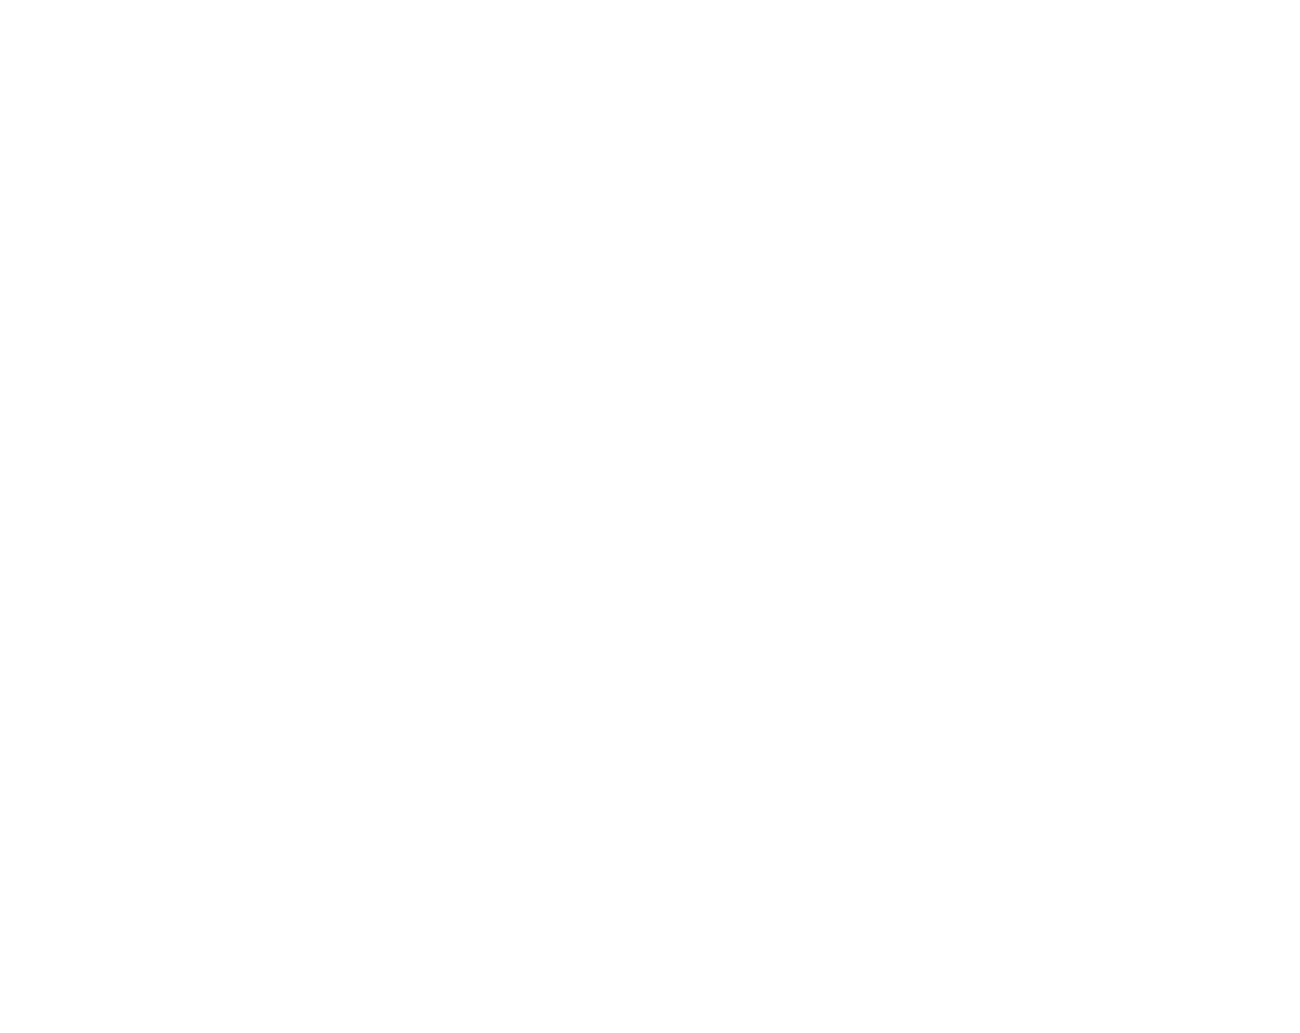 Integrate into an ecosystem of quality life